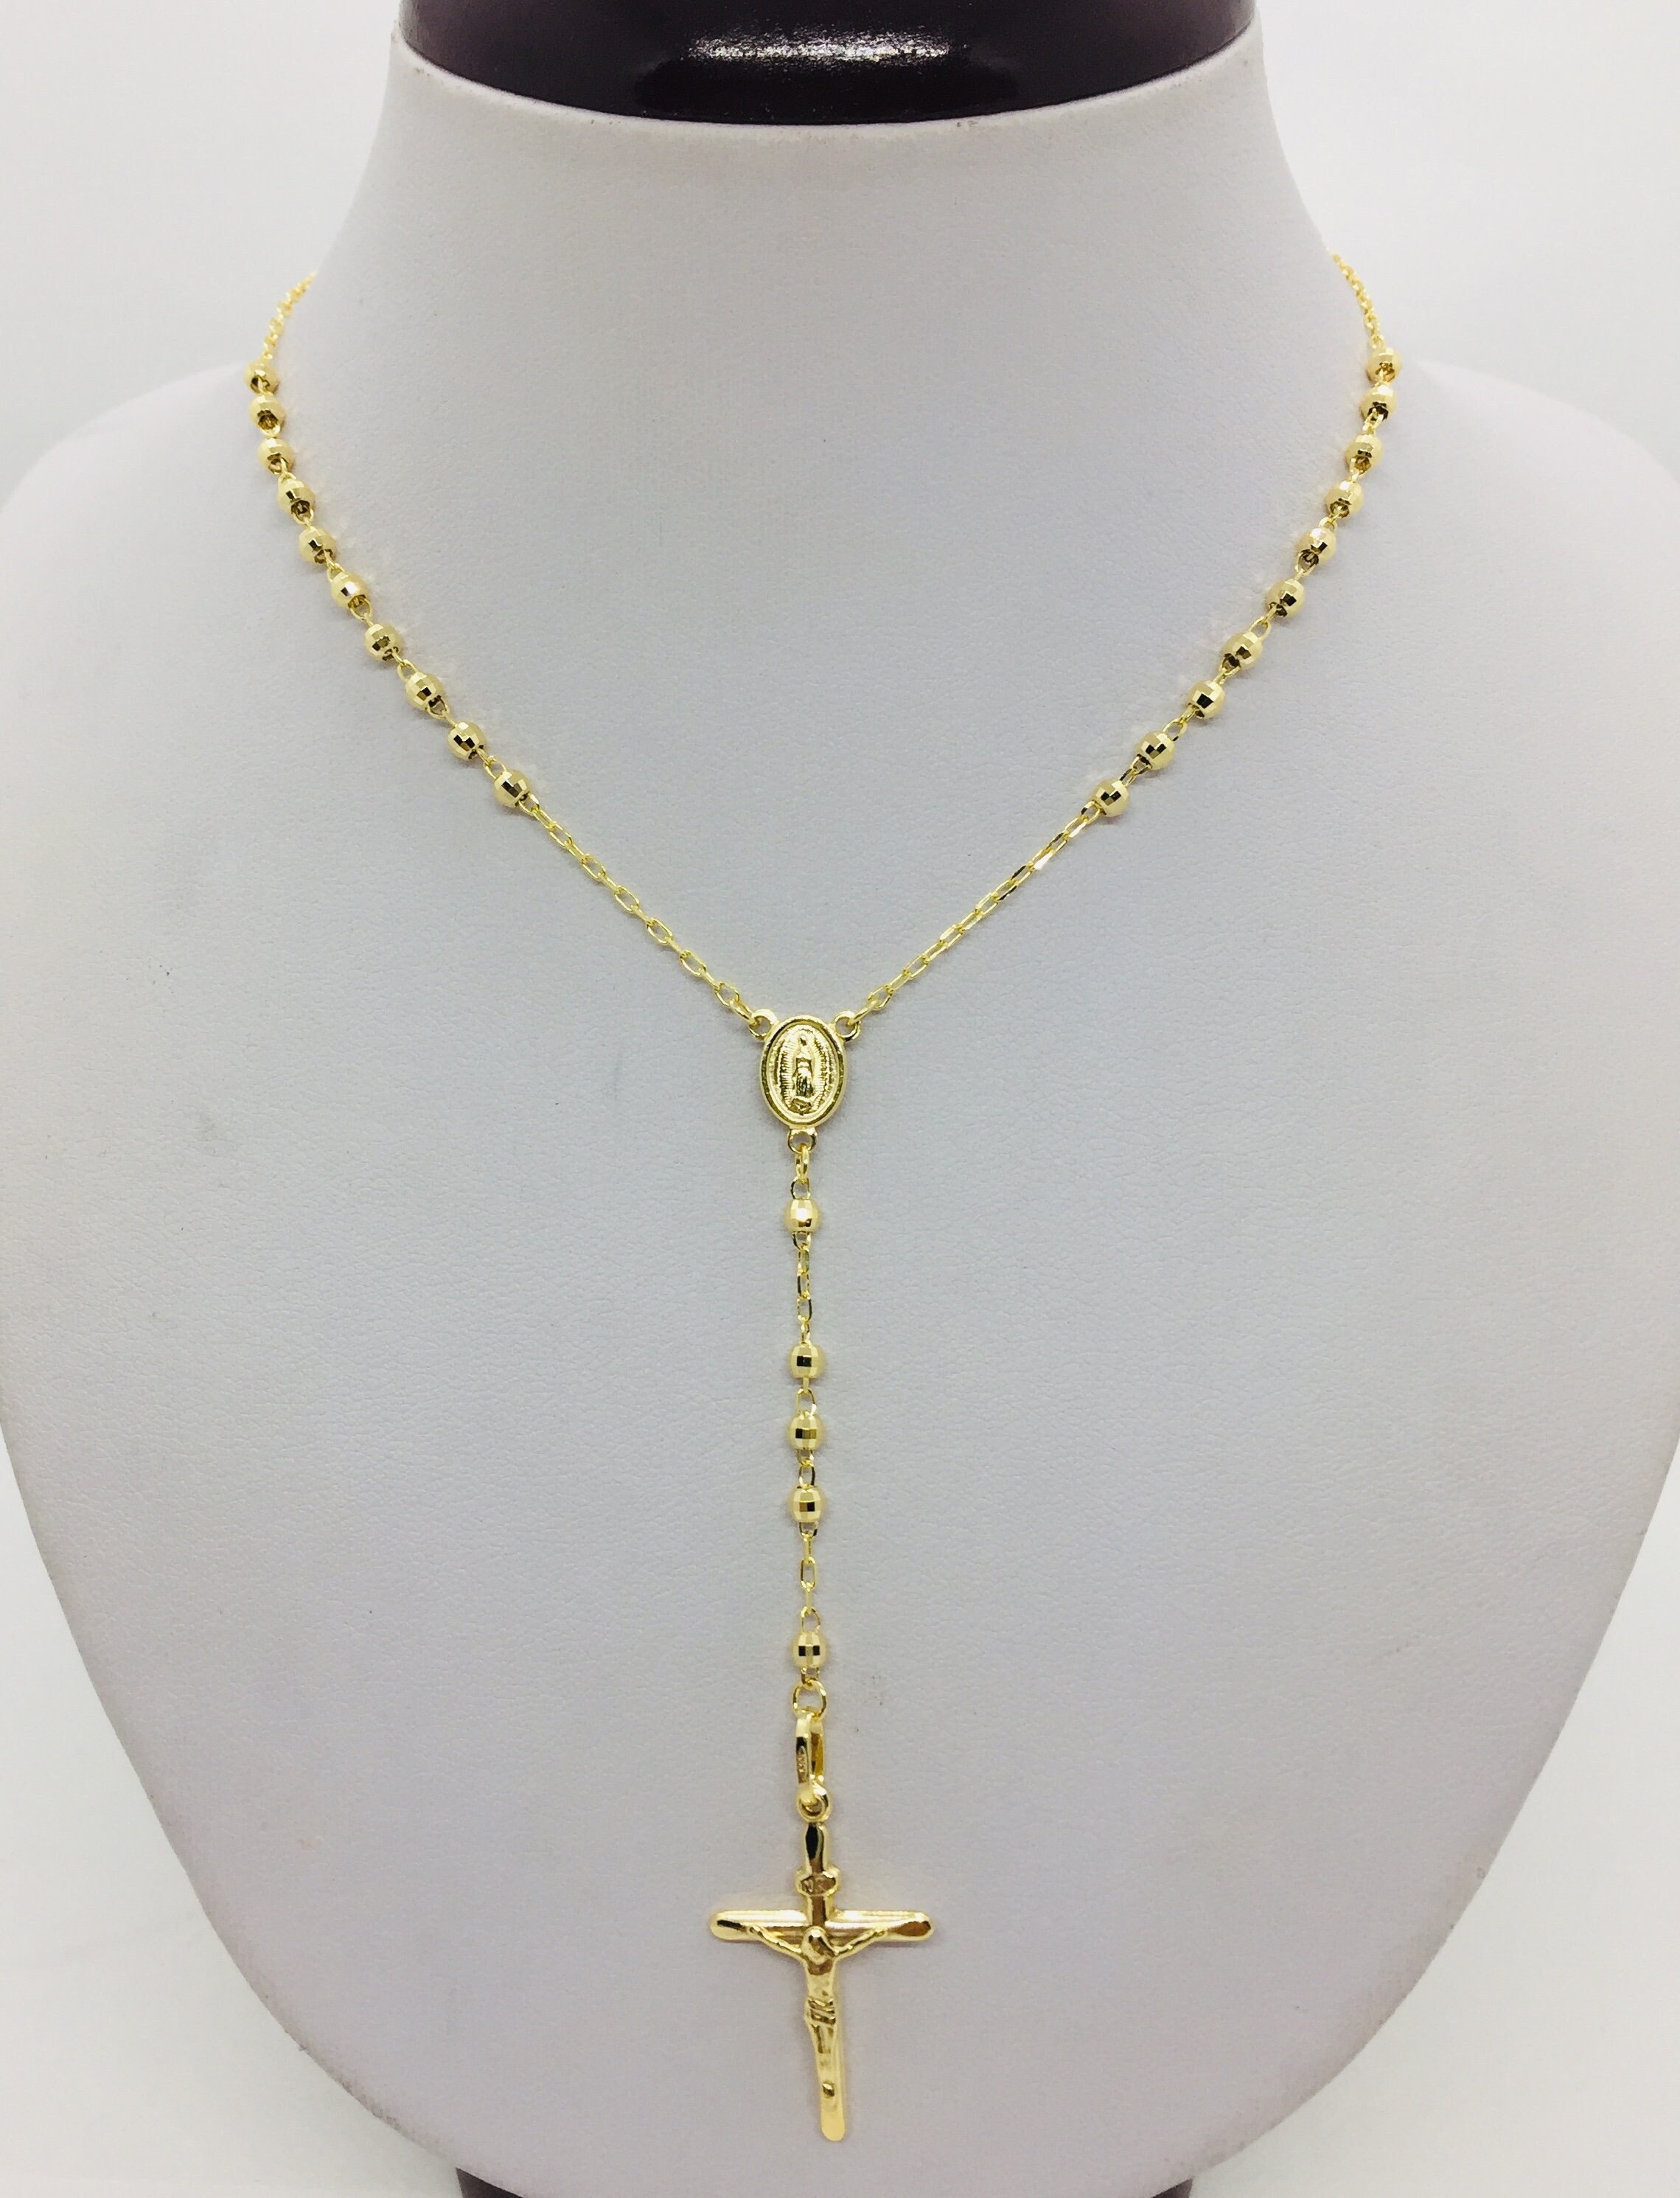 Gold Rosary Necklace, Rosary Style Necklace for Women - Etsy | Gold rosary  necklace, Rosary style necklace, Rosary necklace